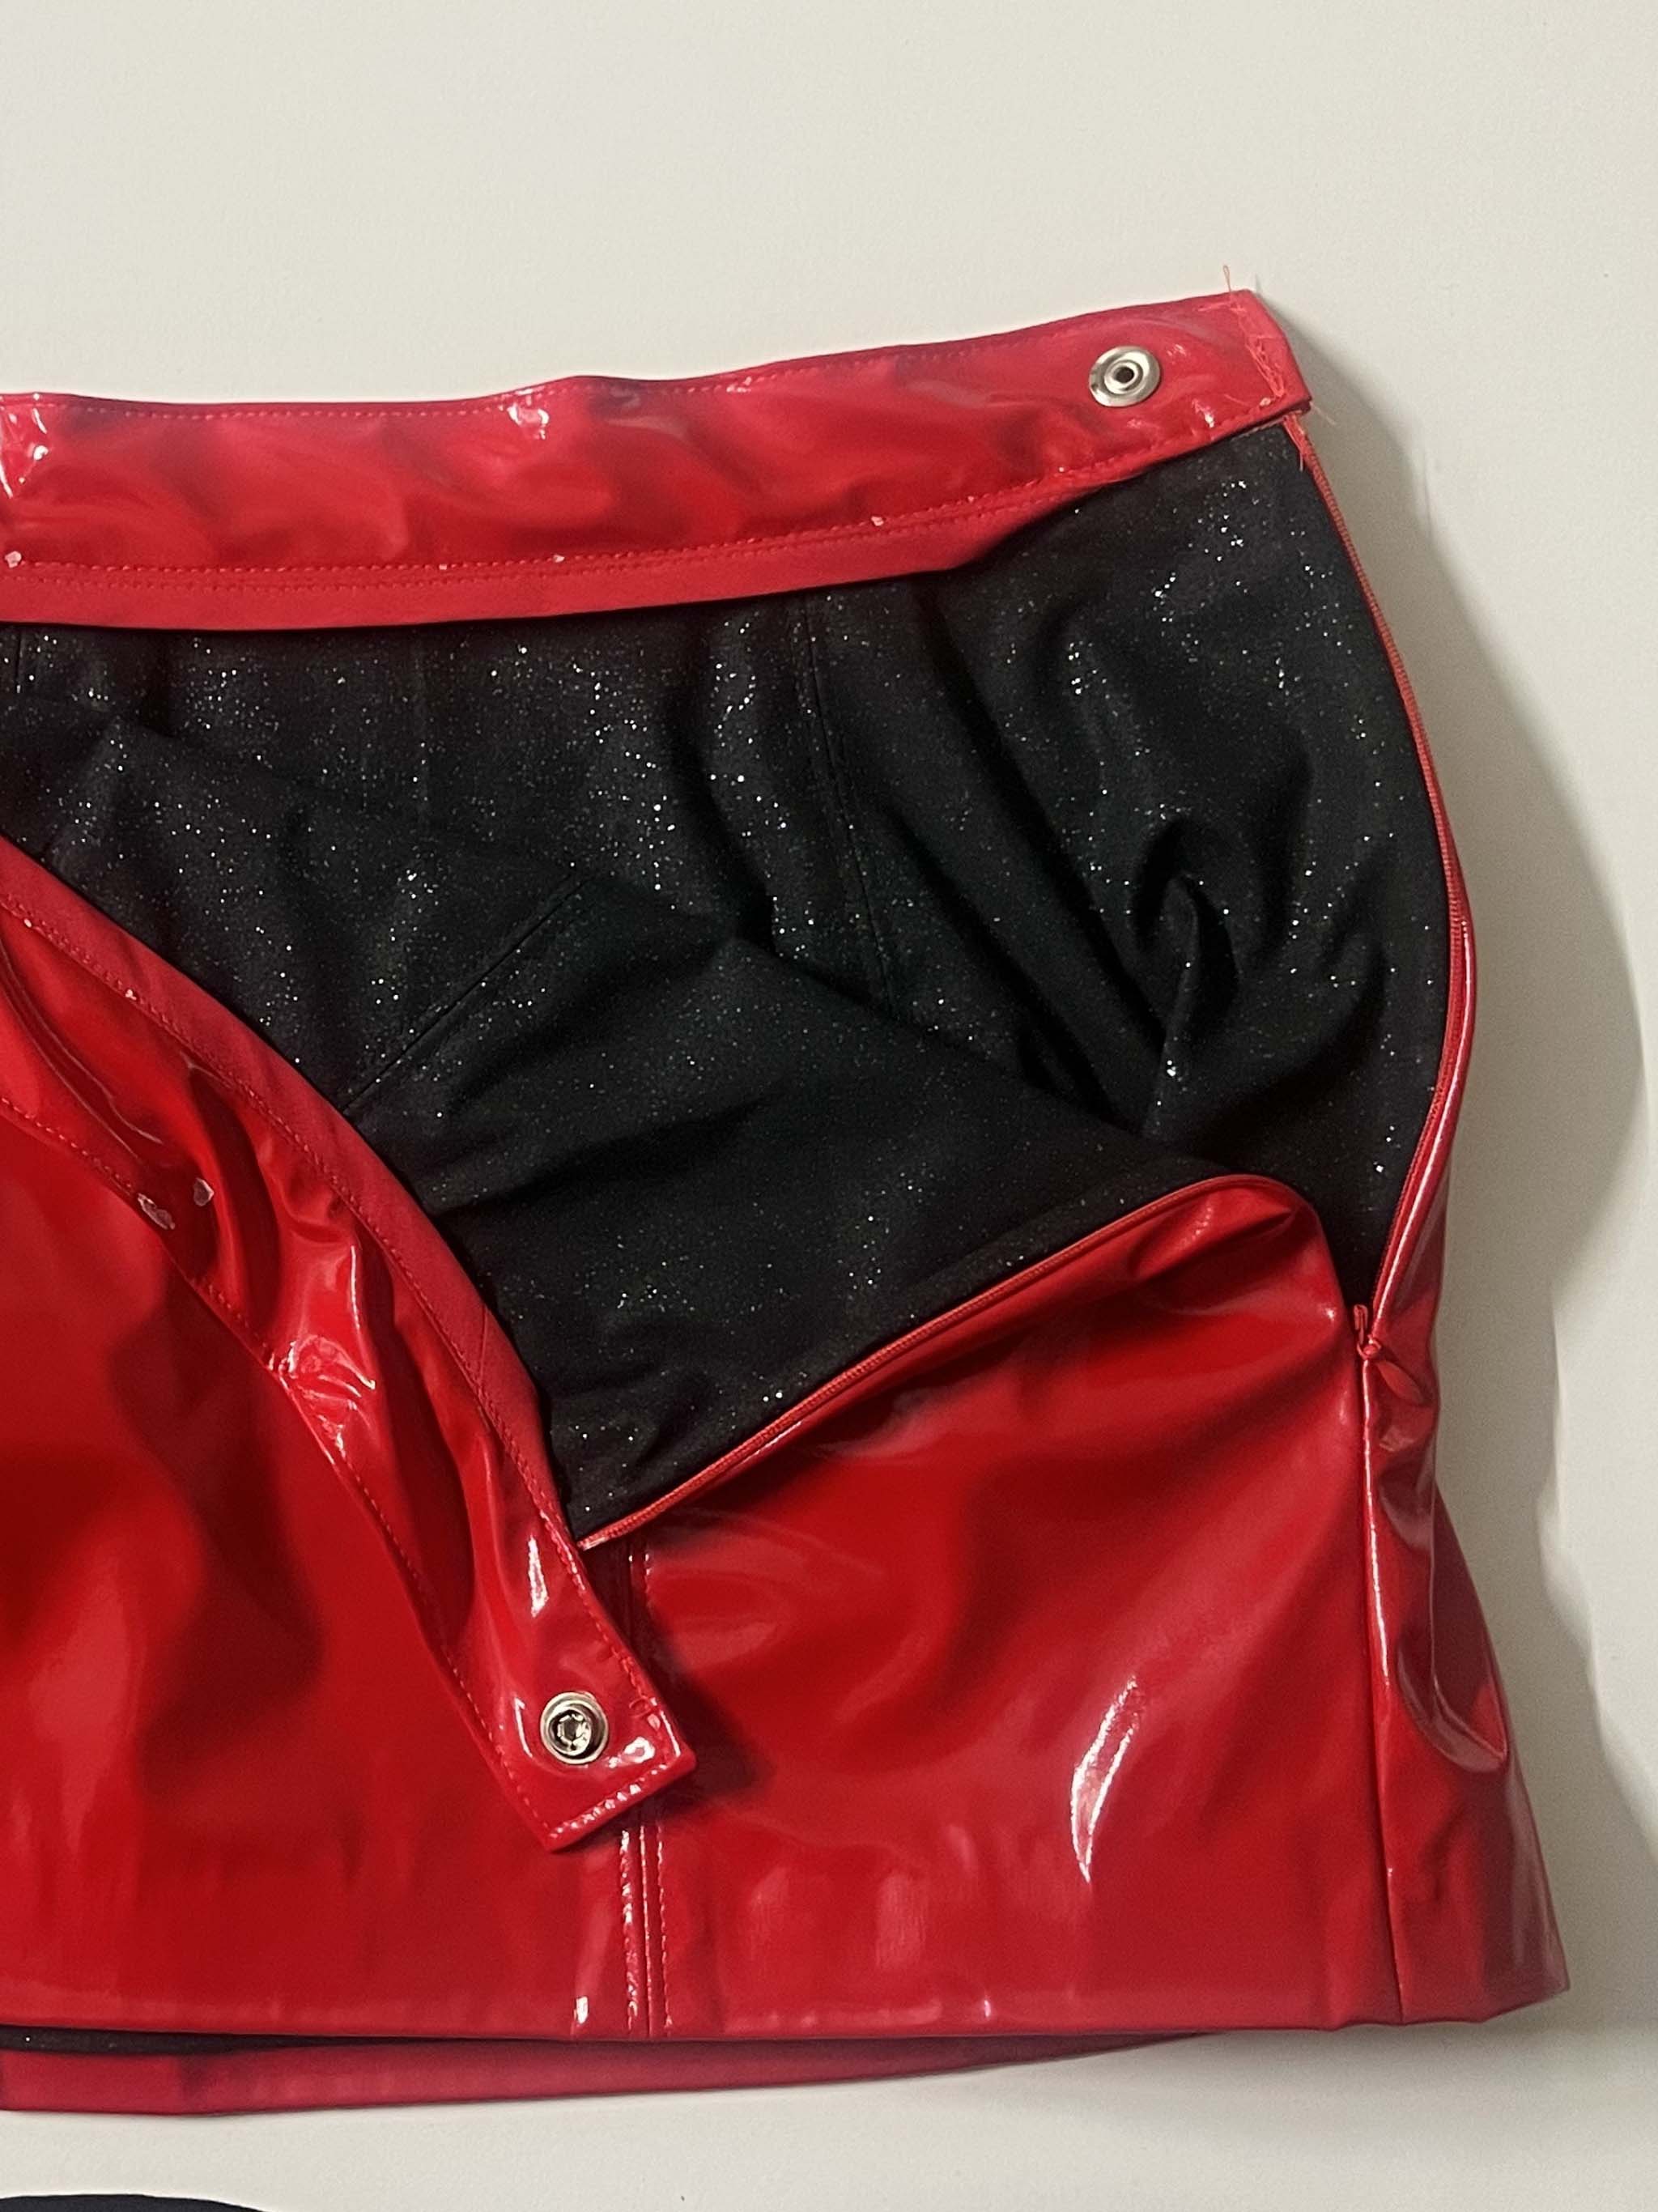 How To Red Leather Skirt Part 3: Finishing Touches